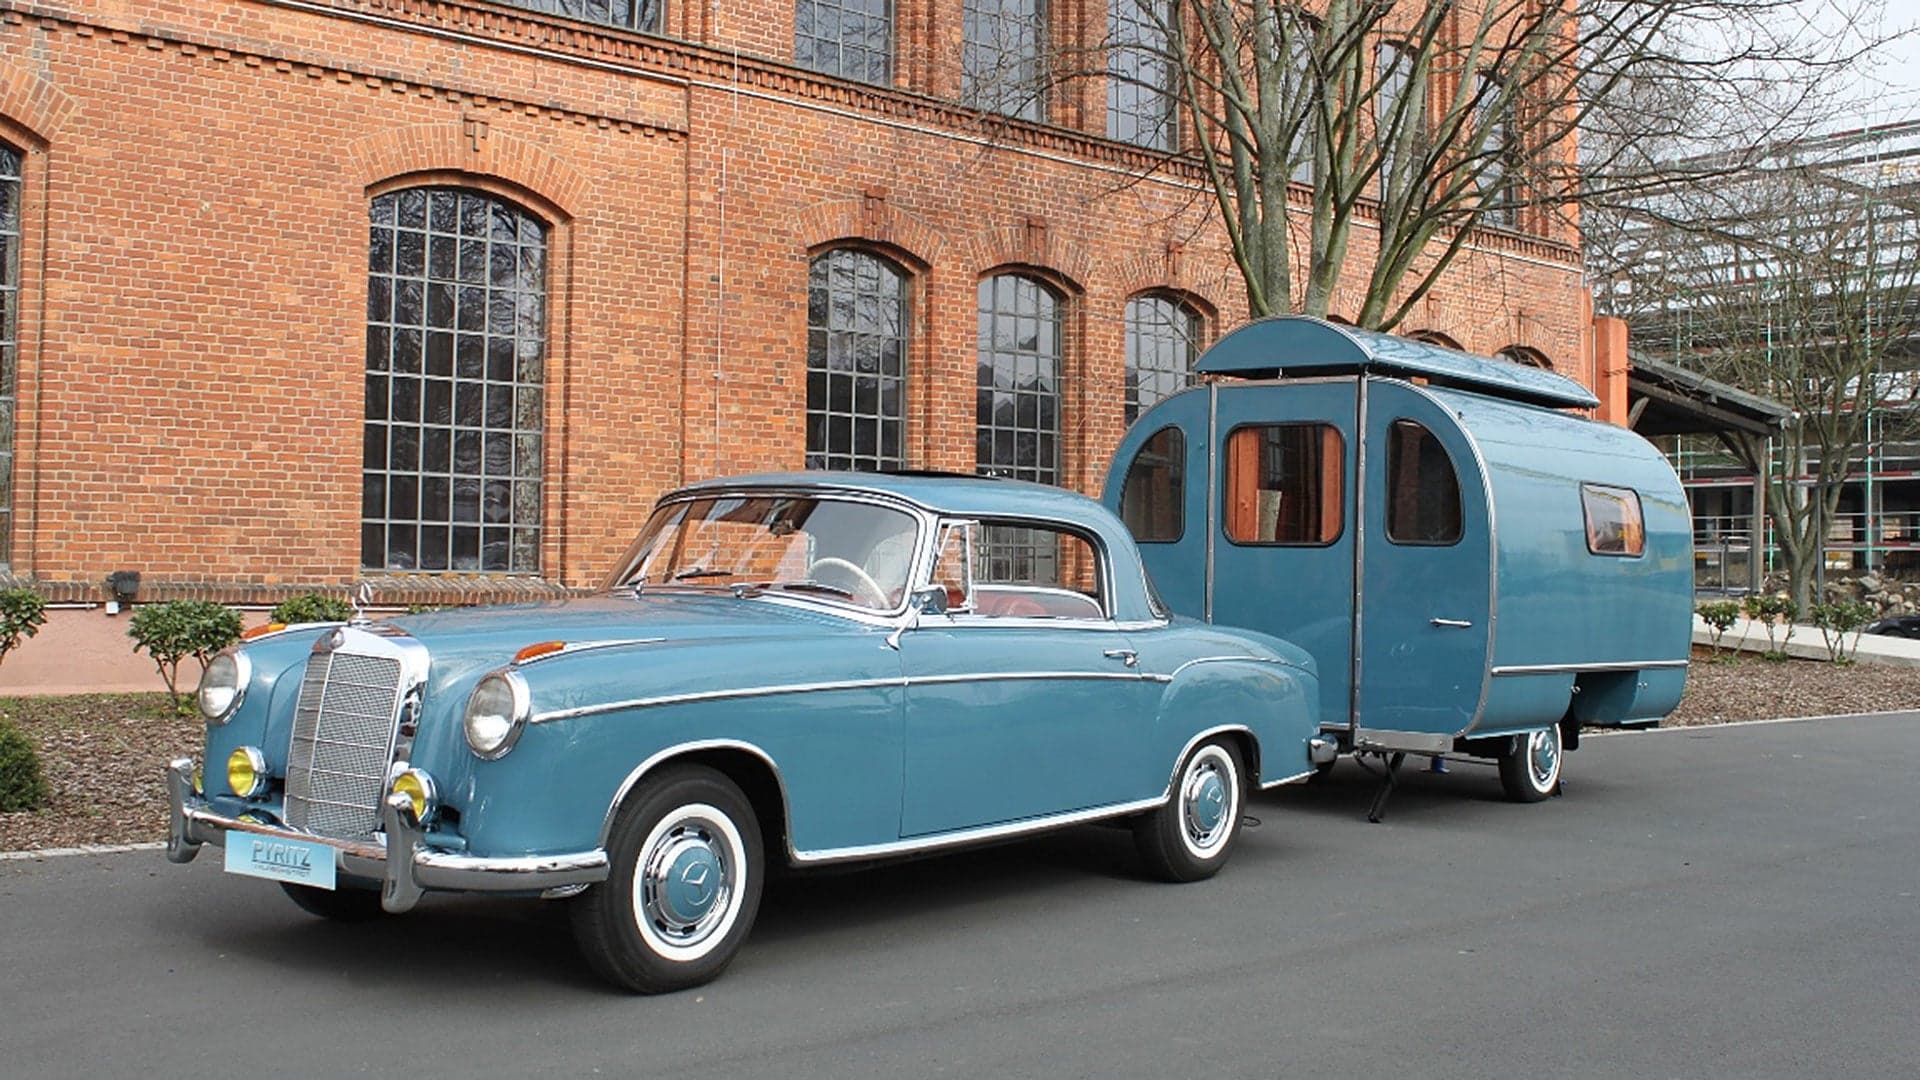 Sell Your House and Buy This Vintage Mercedes Combo